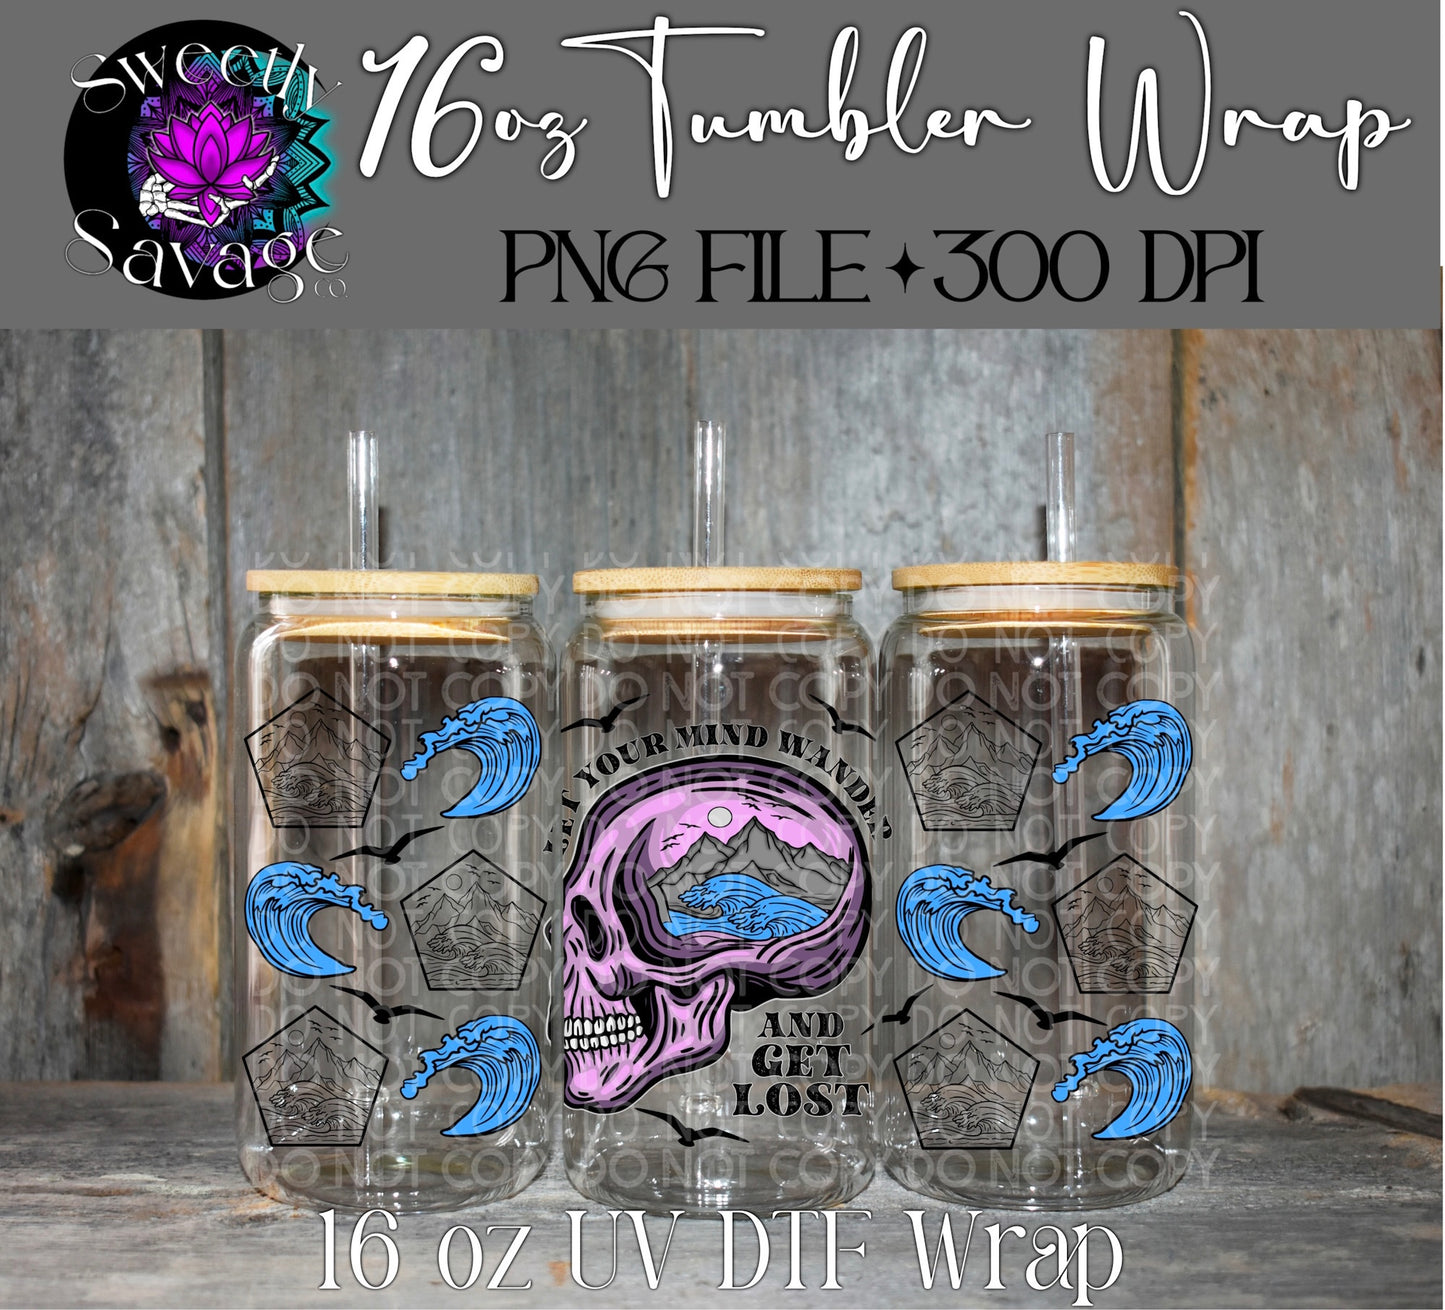 Let your mind wander and get lost 16oz tumbler wrap